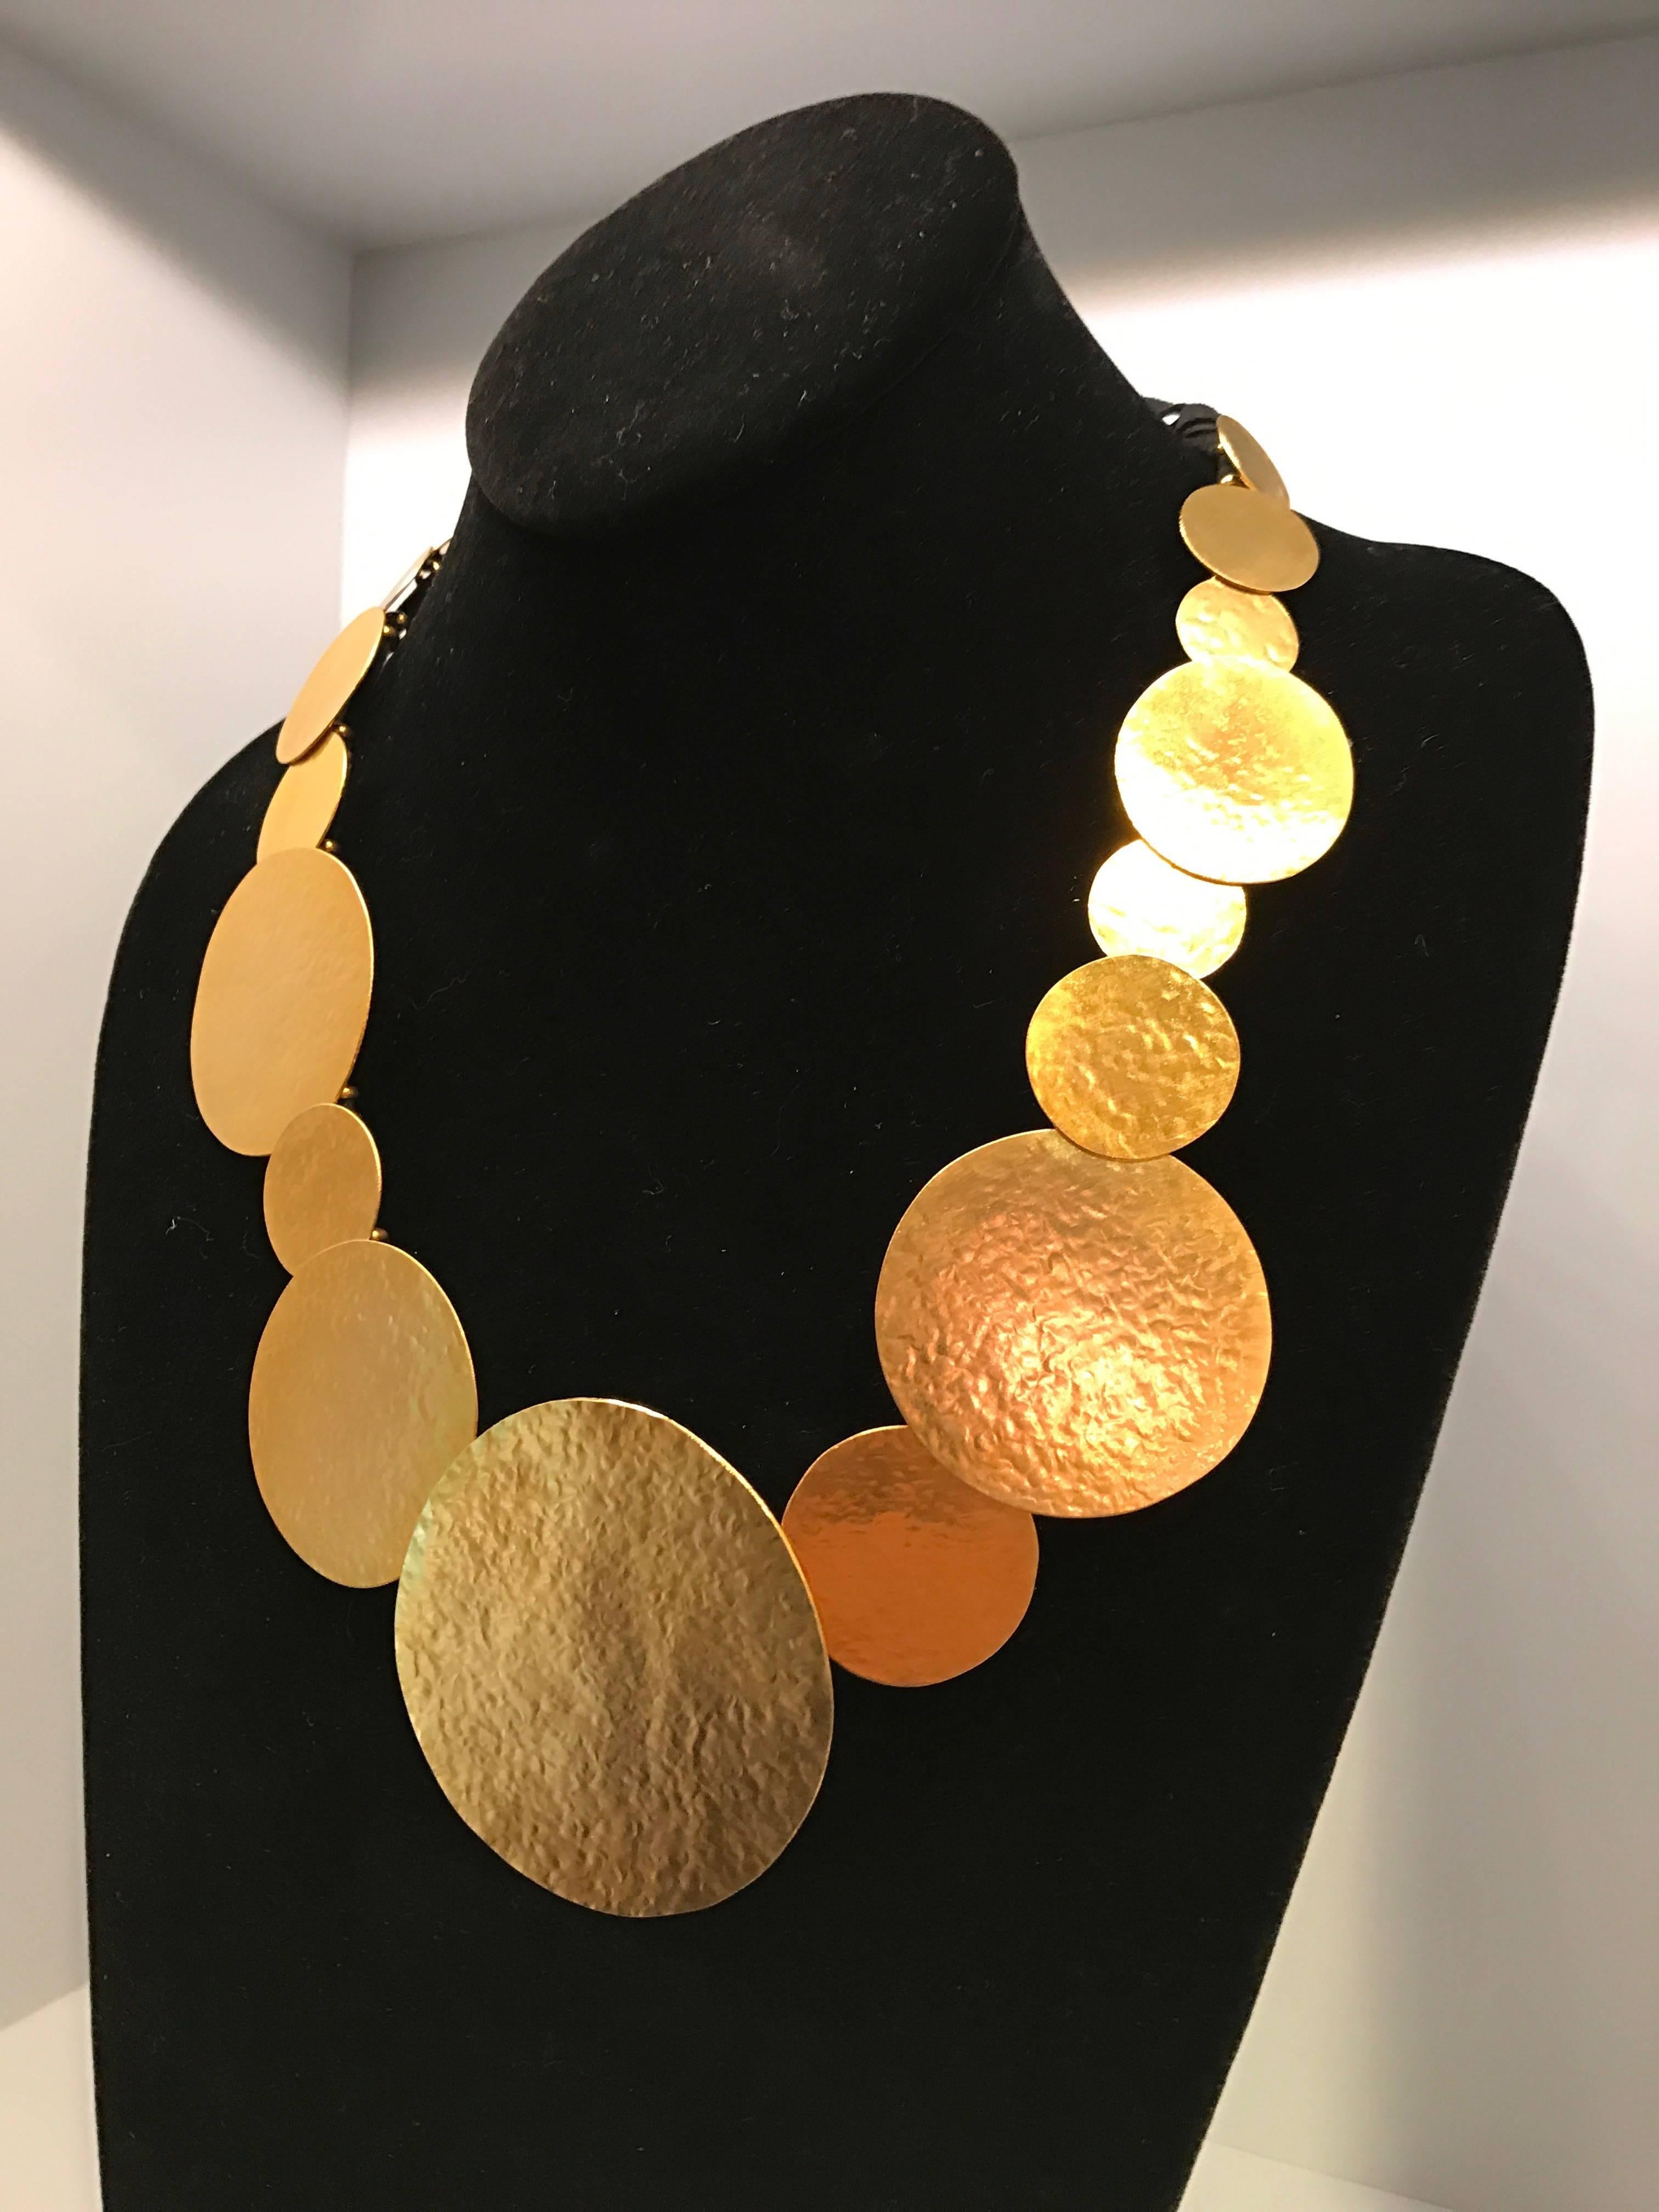 Hand-forged brass and 24-carat gilded pastilles necklace by the French designer Herve Van Der Straeten with an adjustable black suede ribbon, the artist's HV hallmark and his custom jewelry pouch.